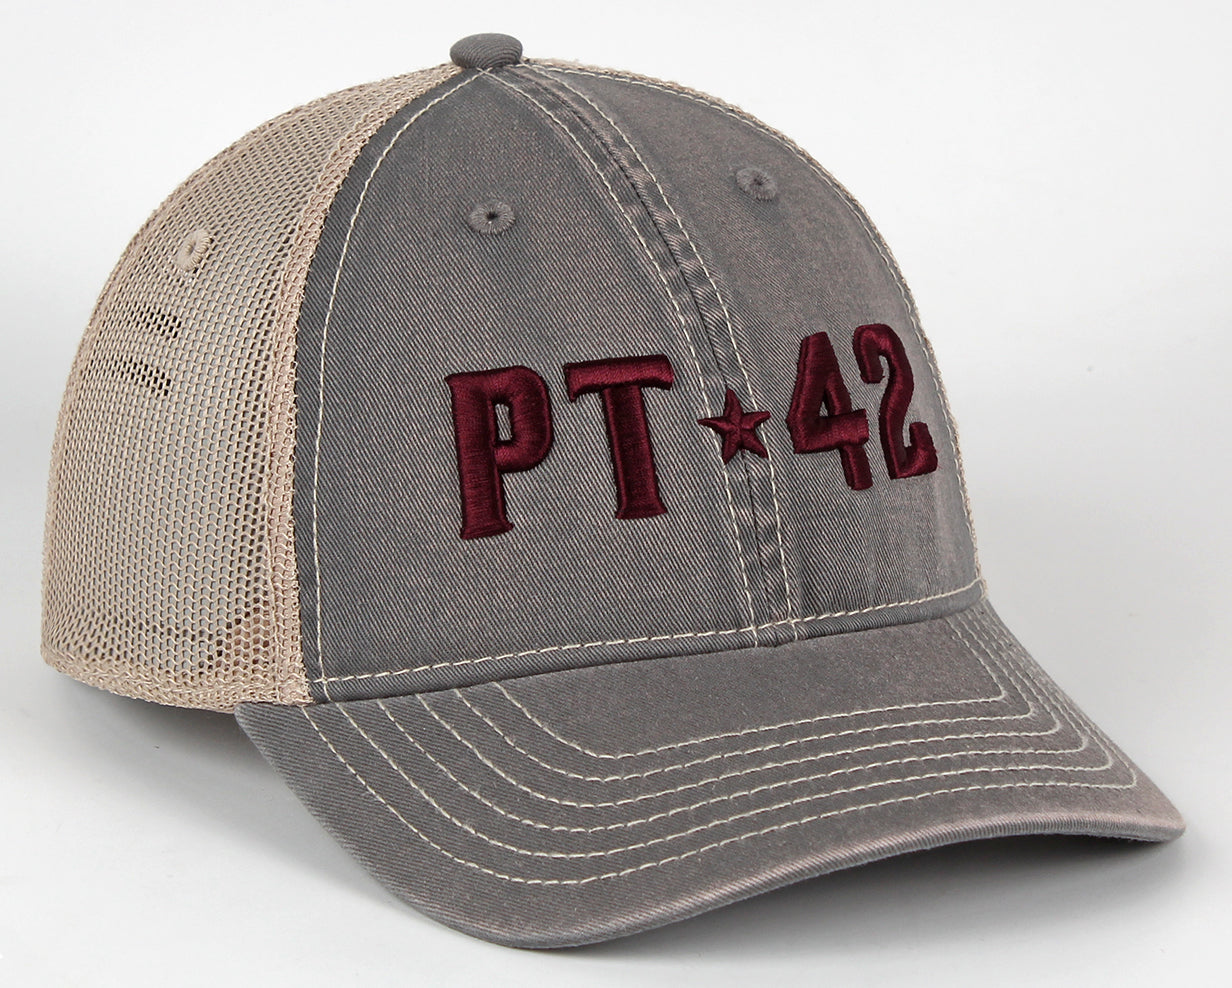 ASU gray adjustable trucker hat with 'PT' and '42' embroidered in maroon with a star in the middle for Pat Tillman